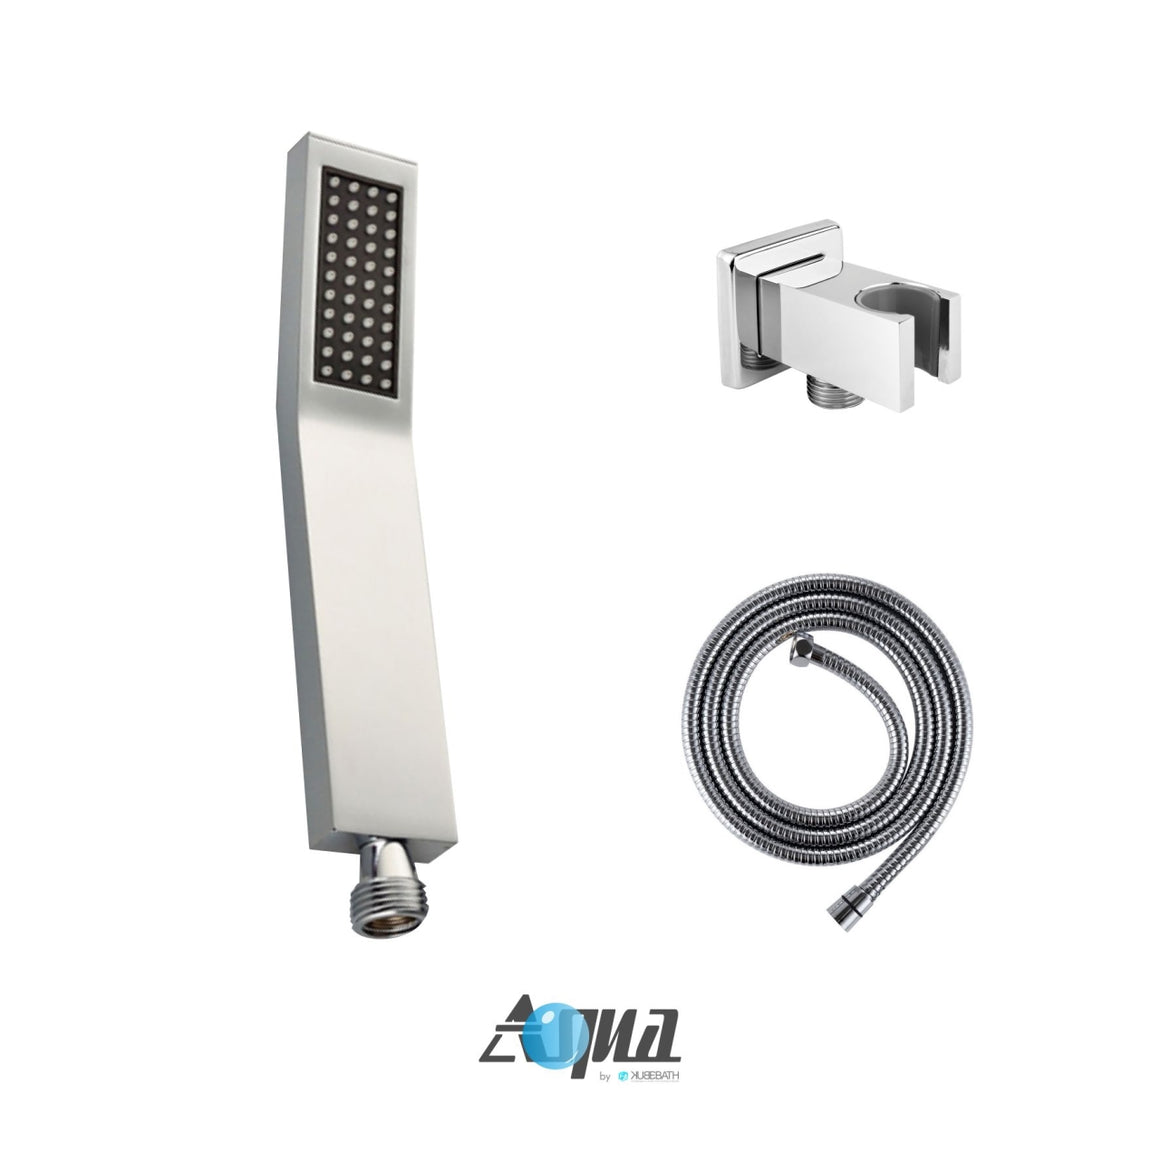 Aqua Piazza Brass Shower Set with 12" Ceiling Mount Square Rain Shower and Handheld